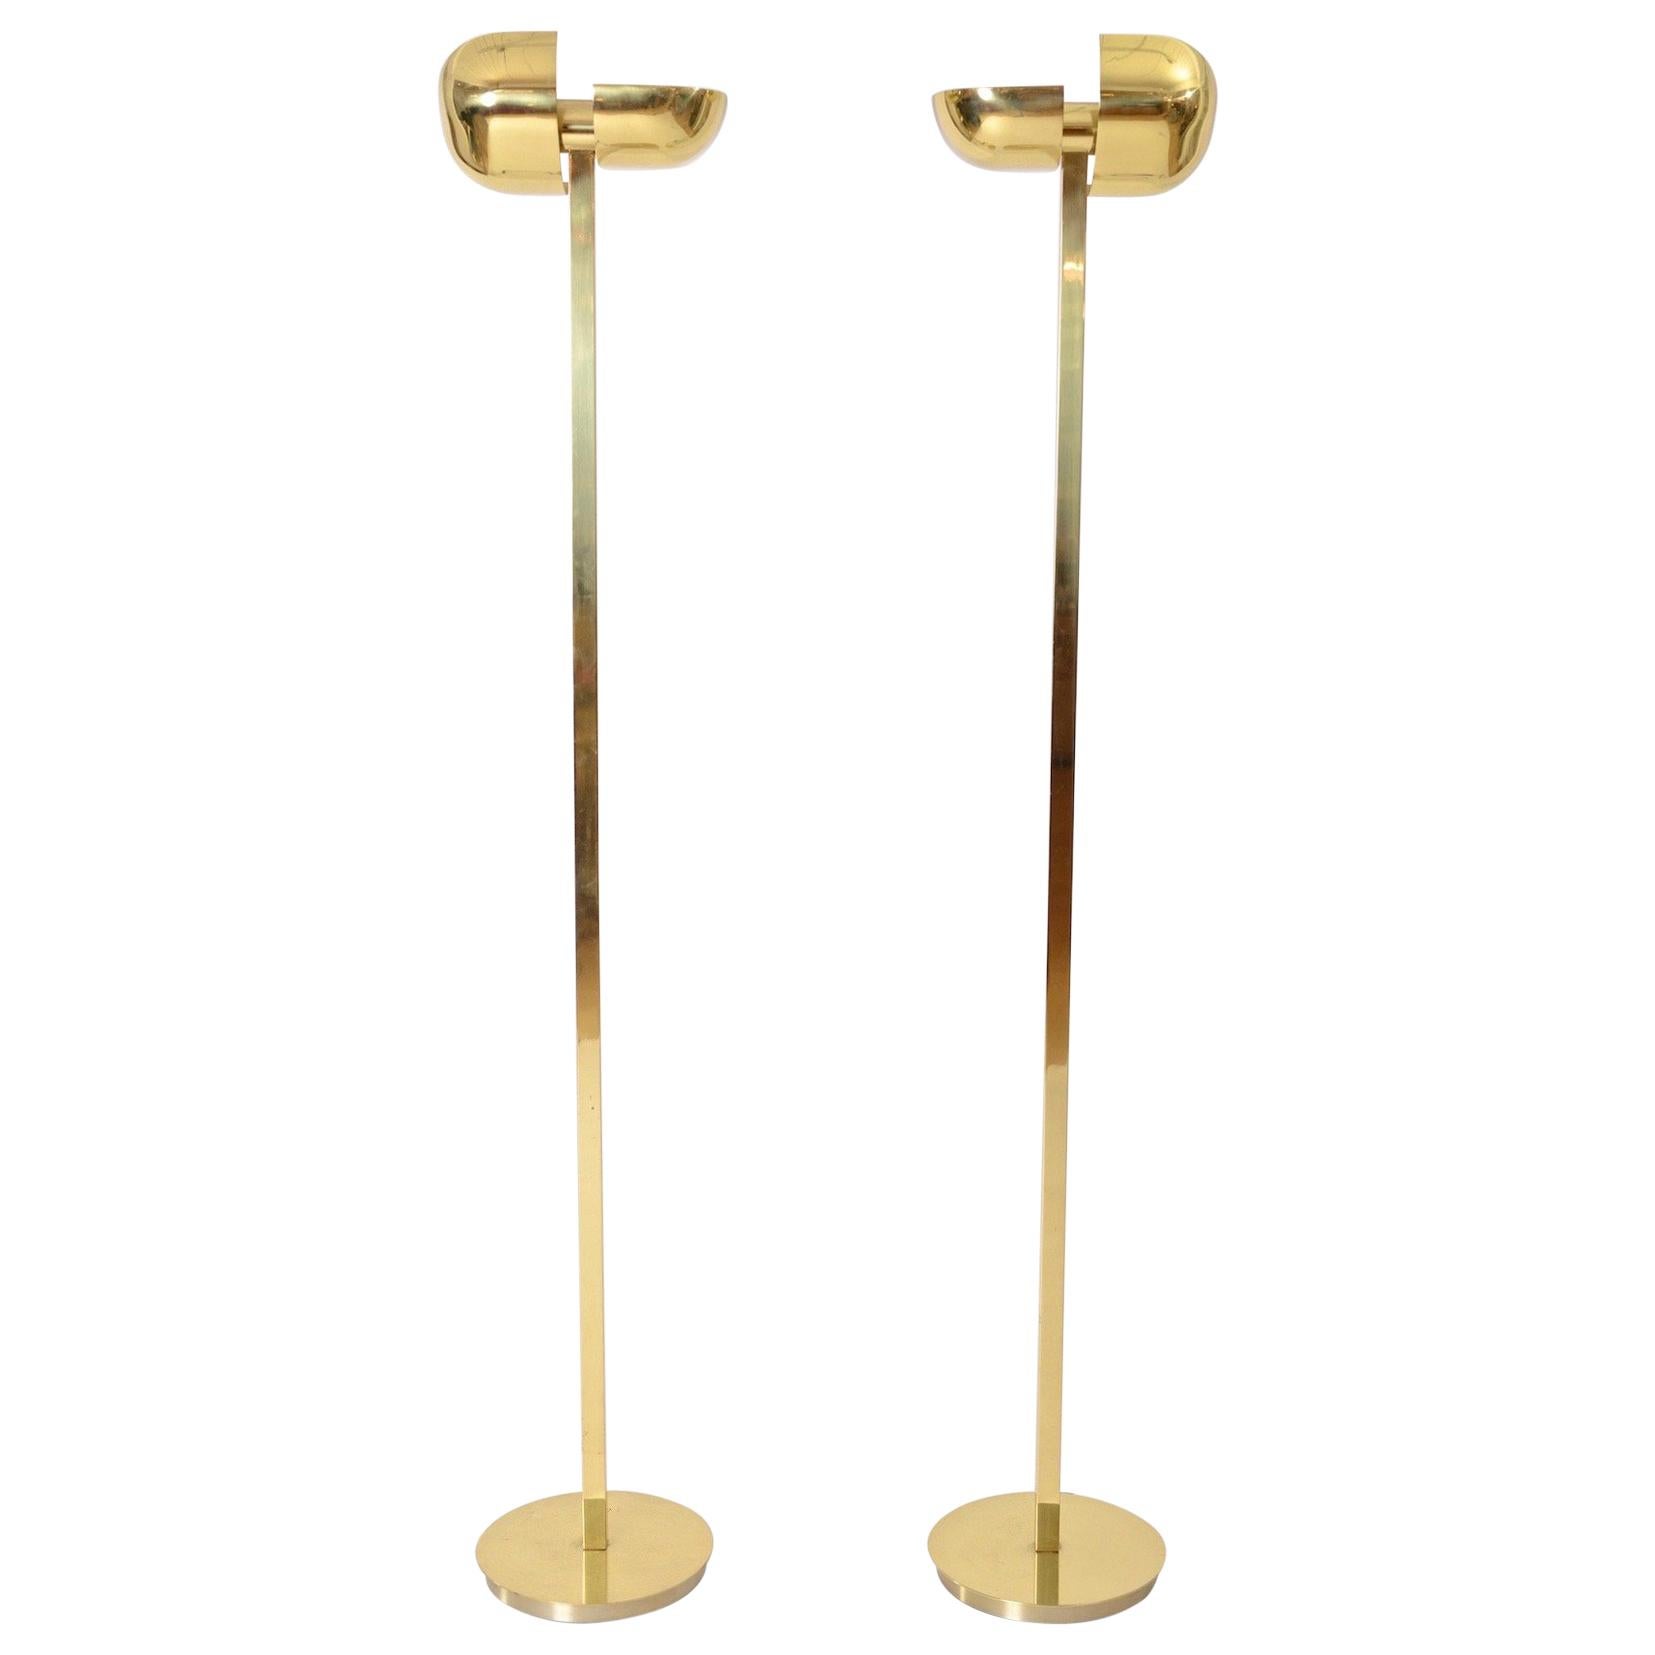 Pair of Adjustable Brass Floor Lamps or Uplighters by Lumi, Italy , circa 1970